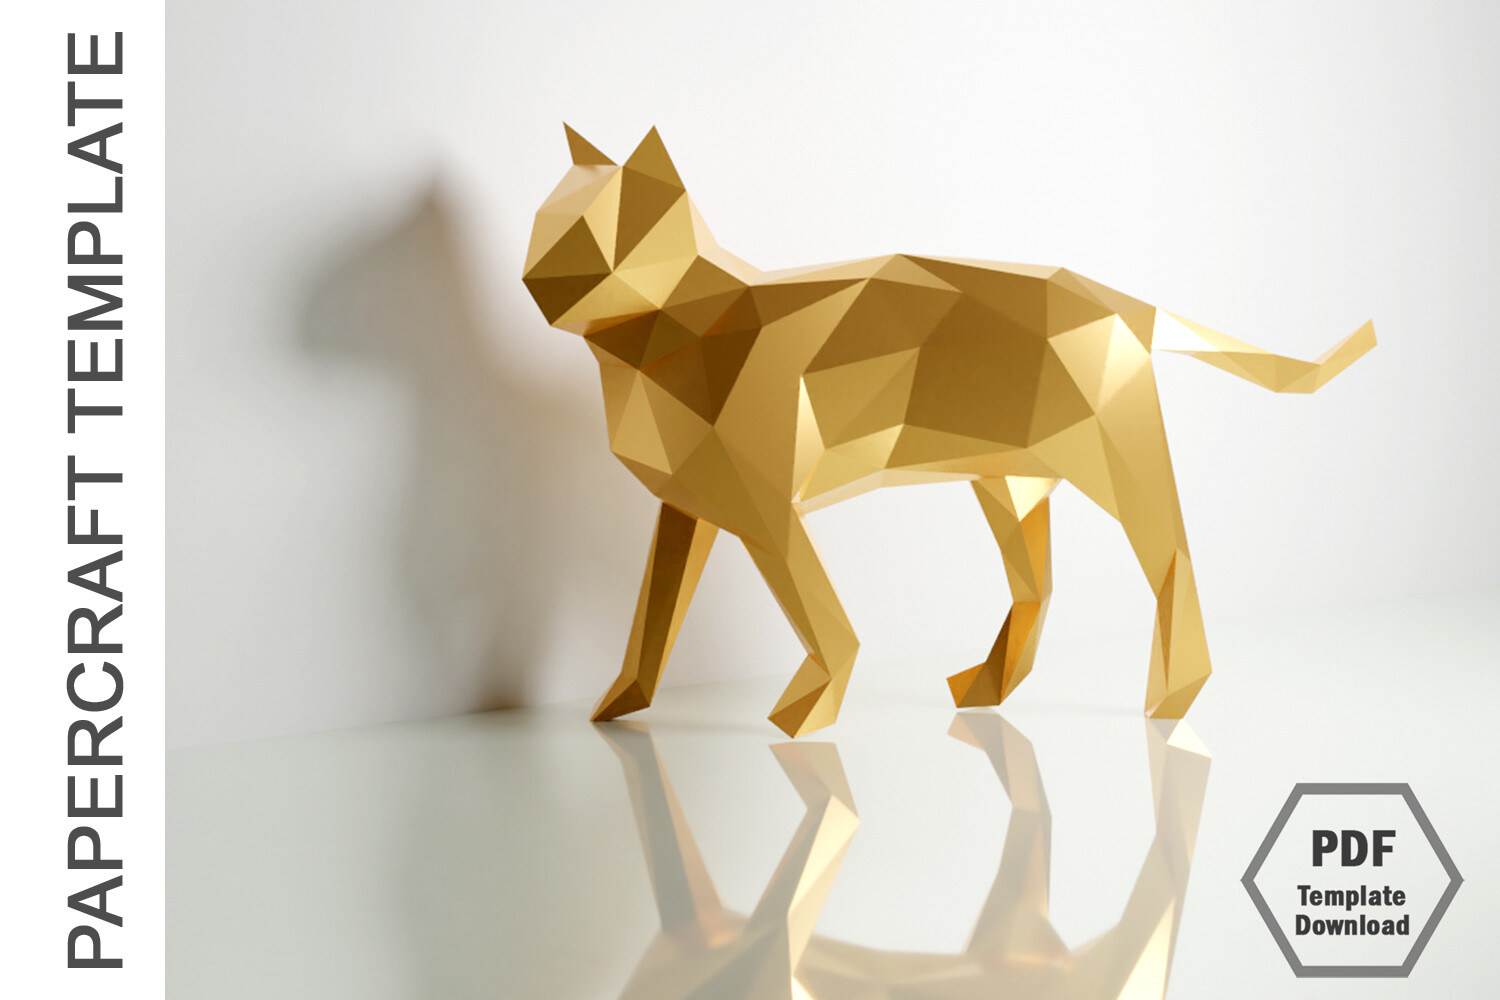 Papercraft: Over 5,505 Royalty-Free Licensable Stock Vectors